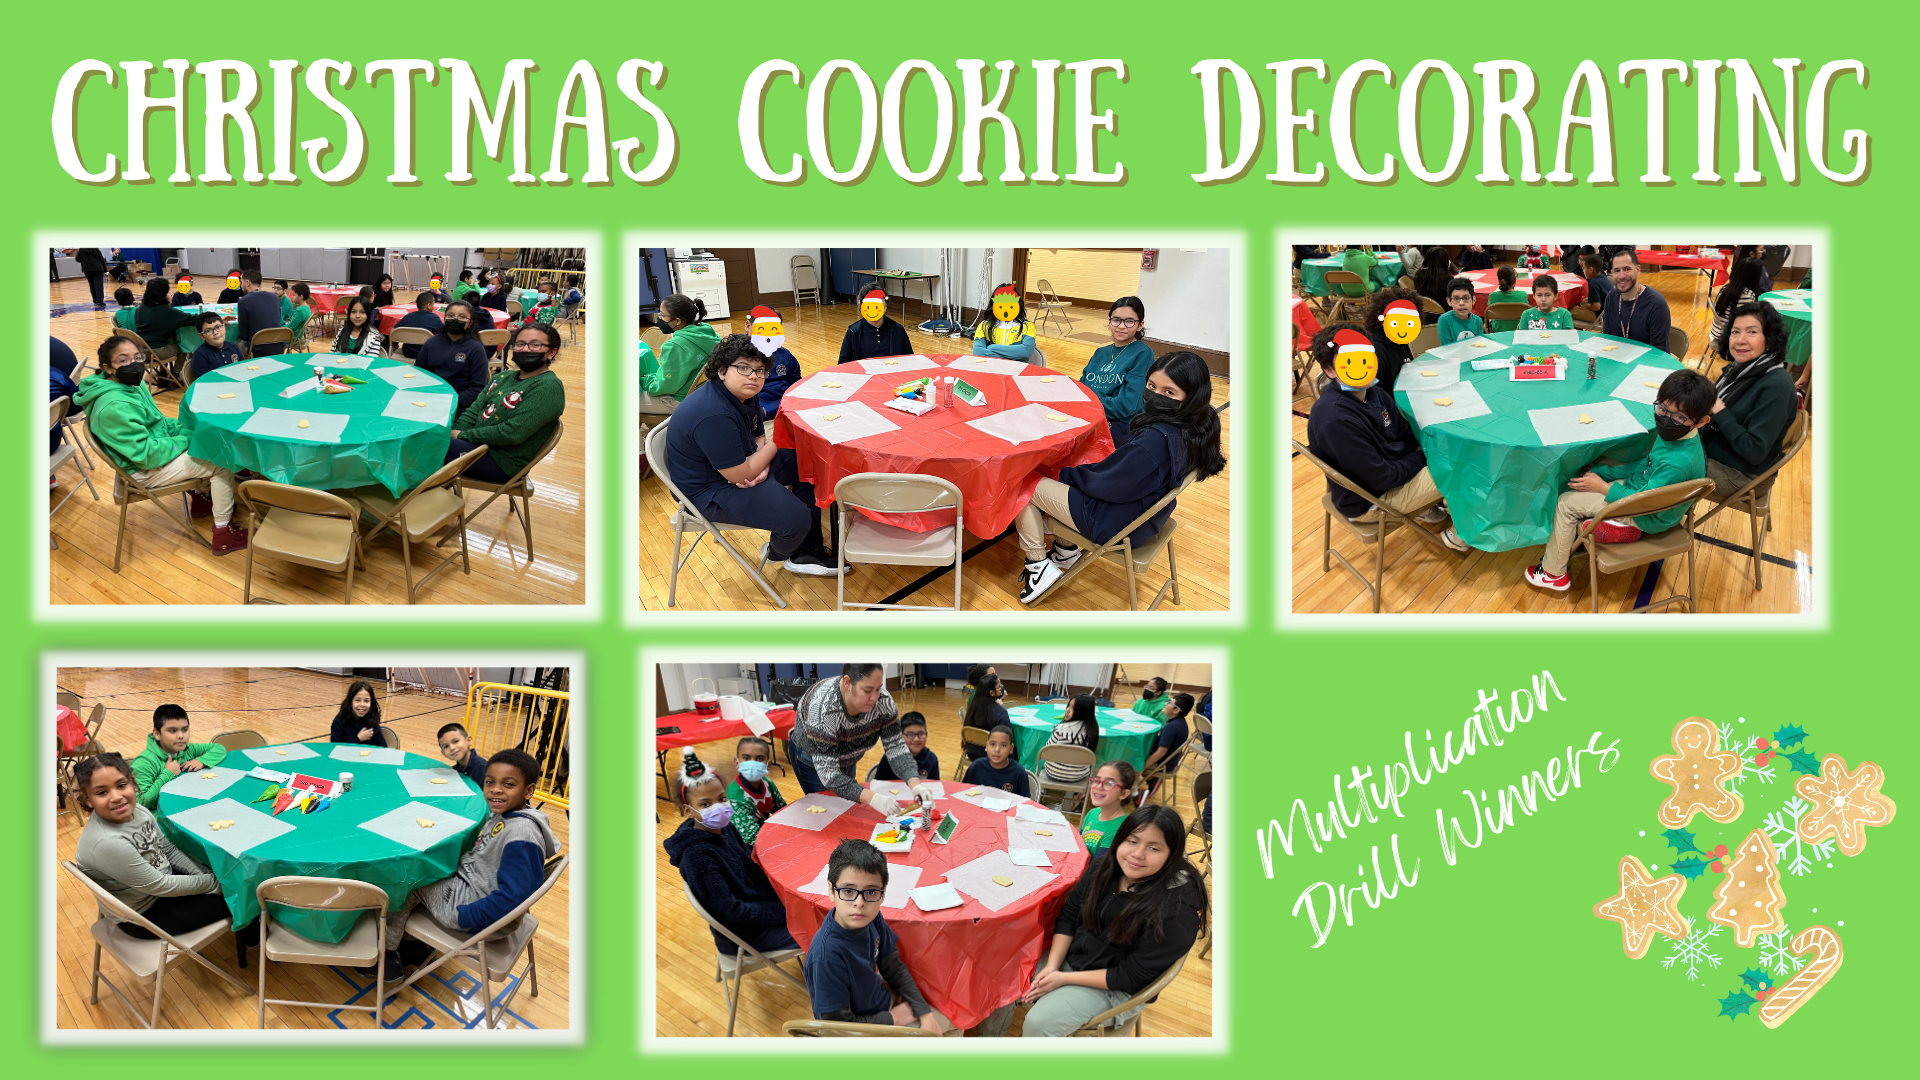 Christmas Cookie Decorating Celebration at the Roosevelt School